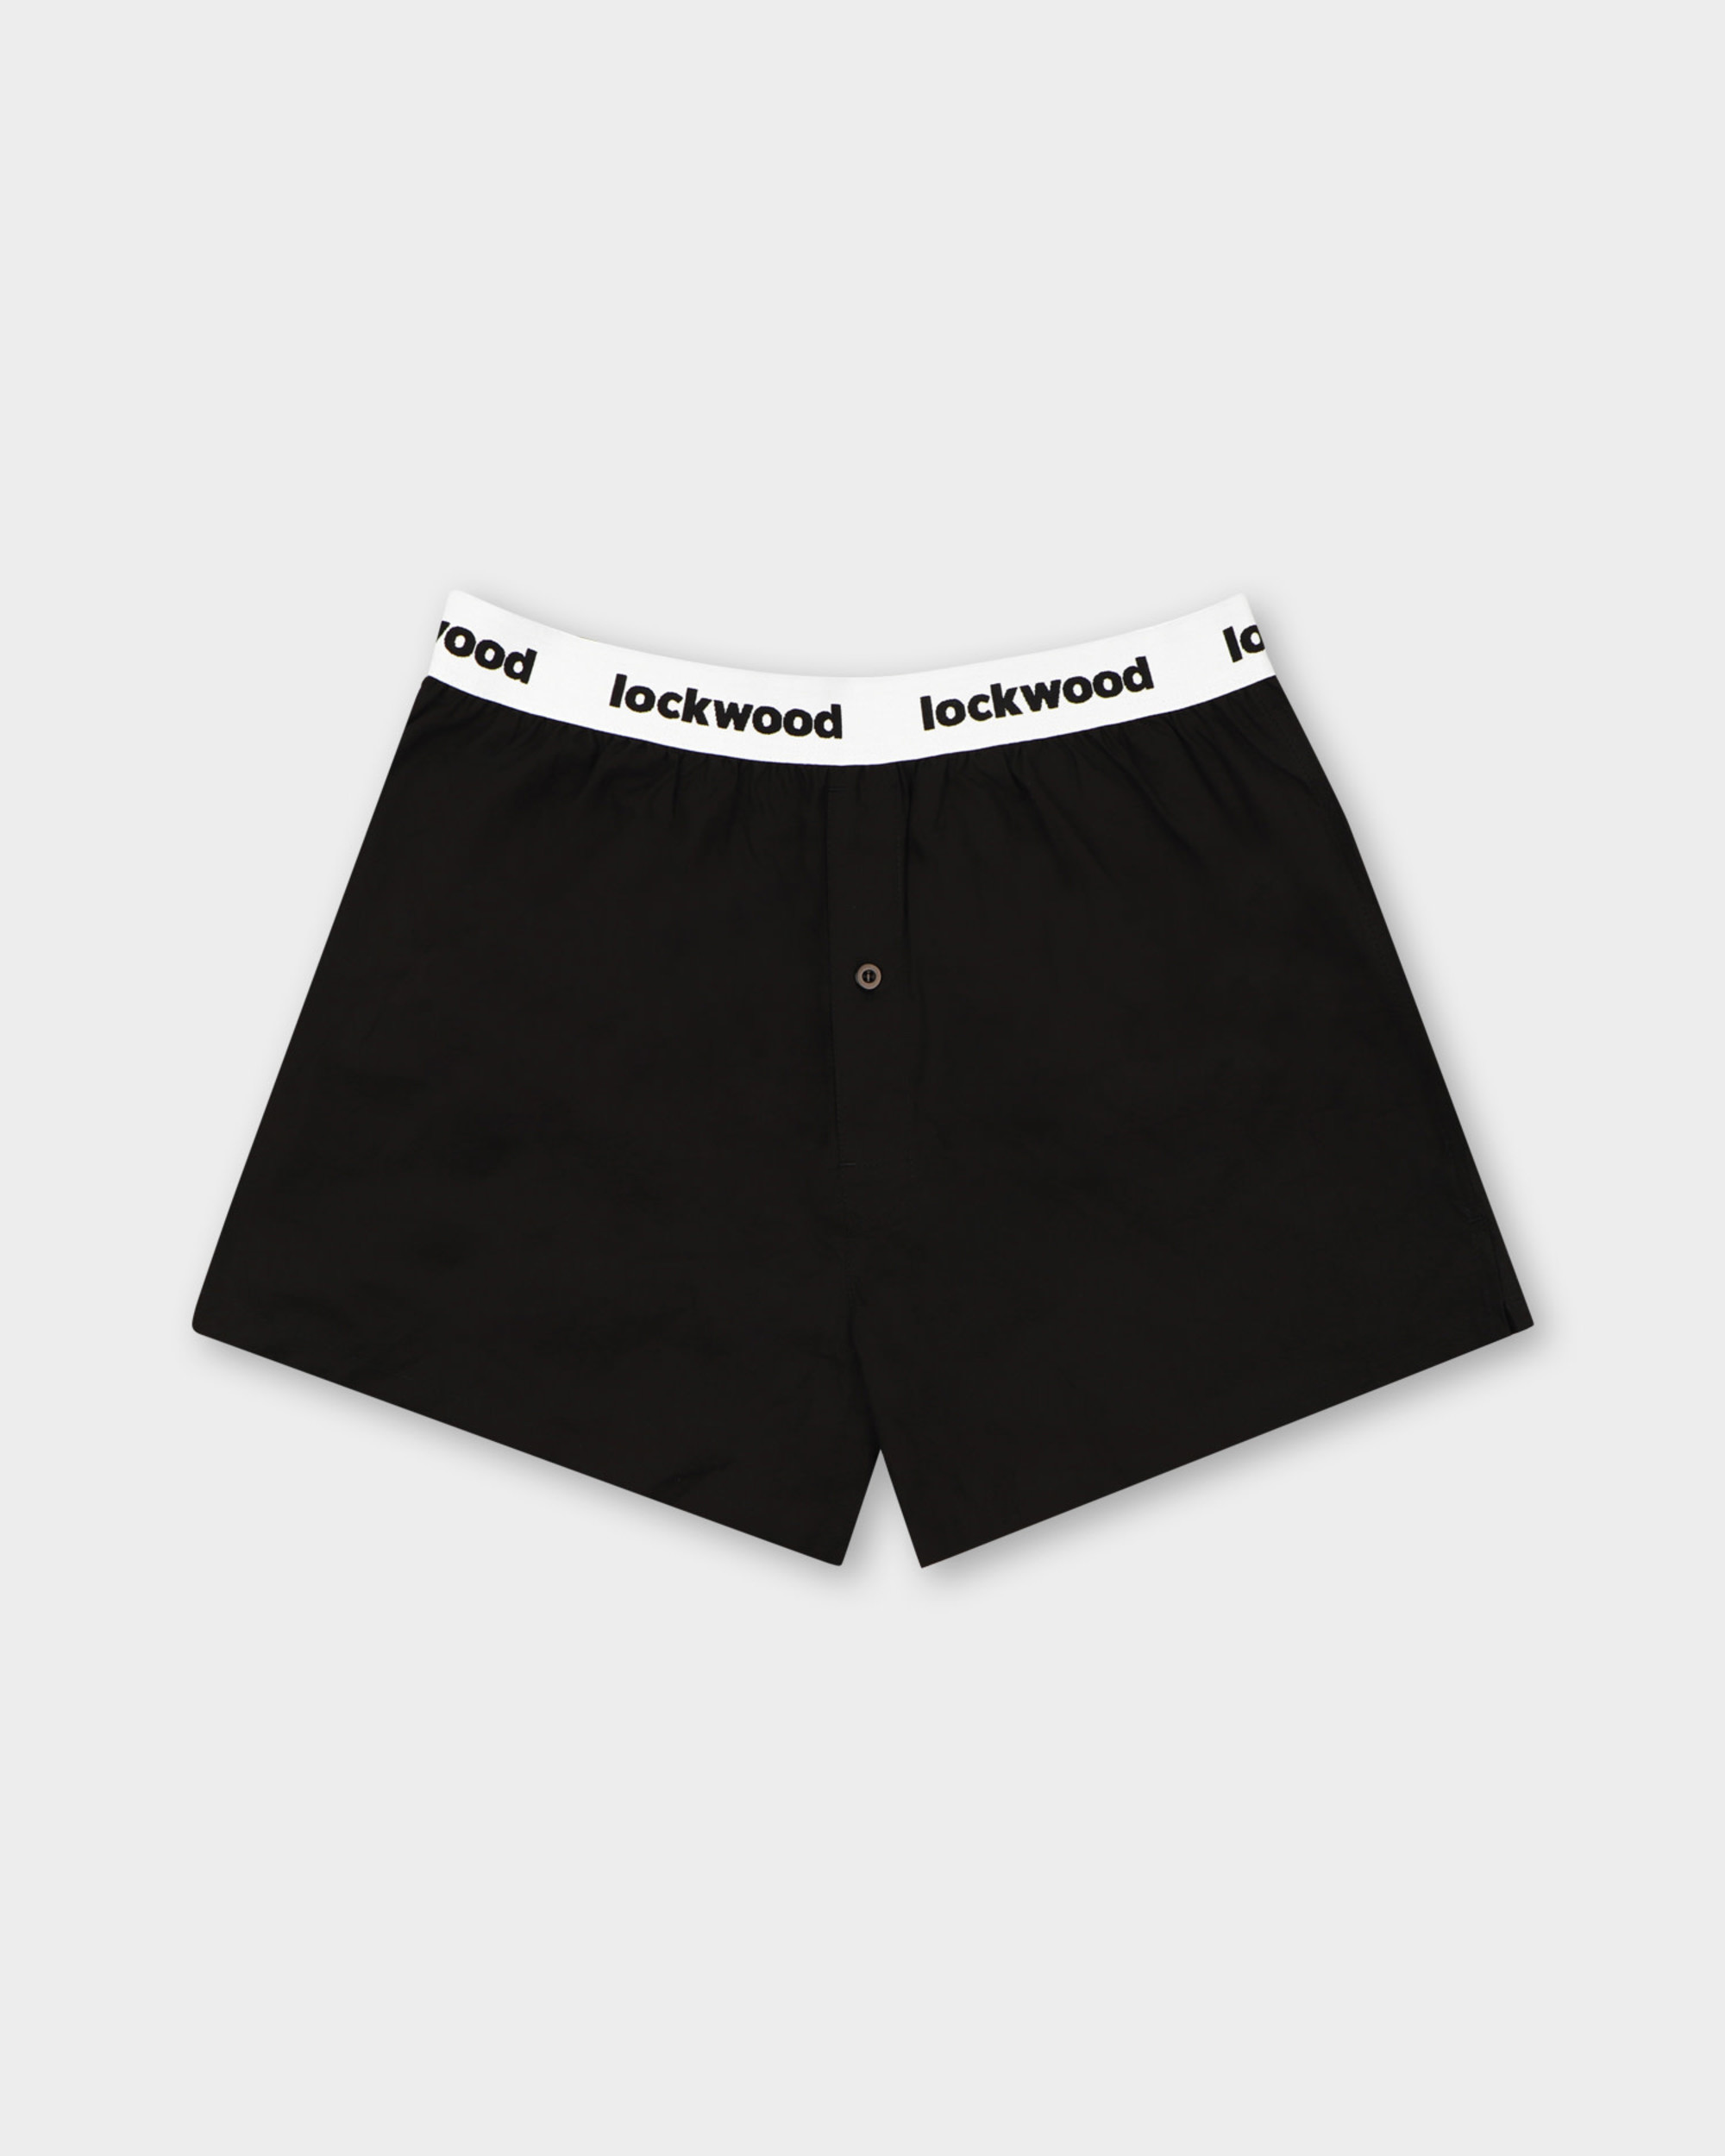 Lockwood for daily Use Boxers Black